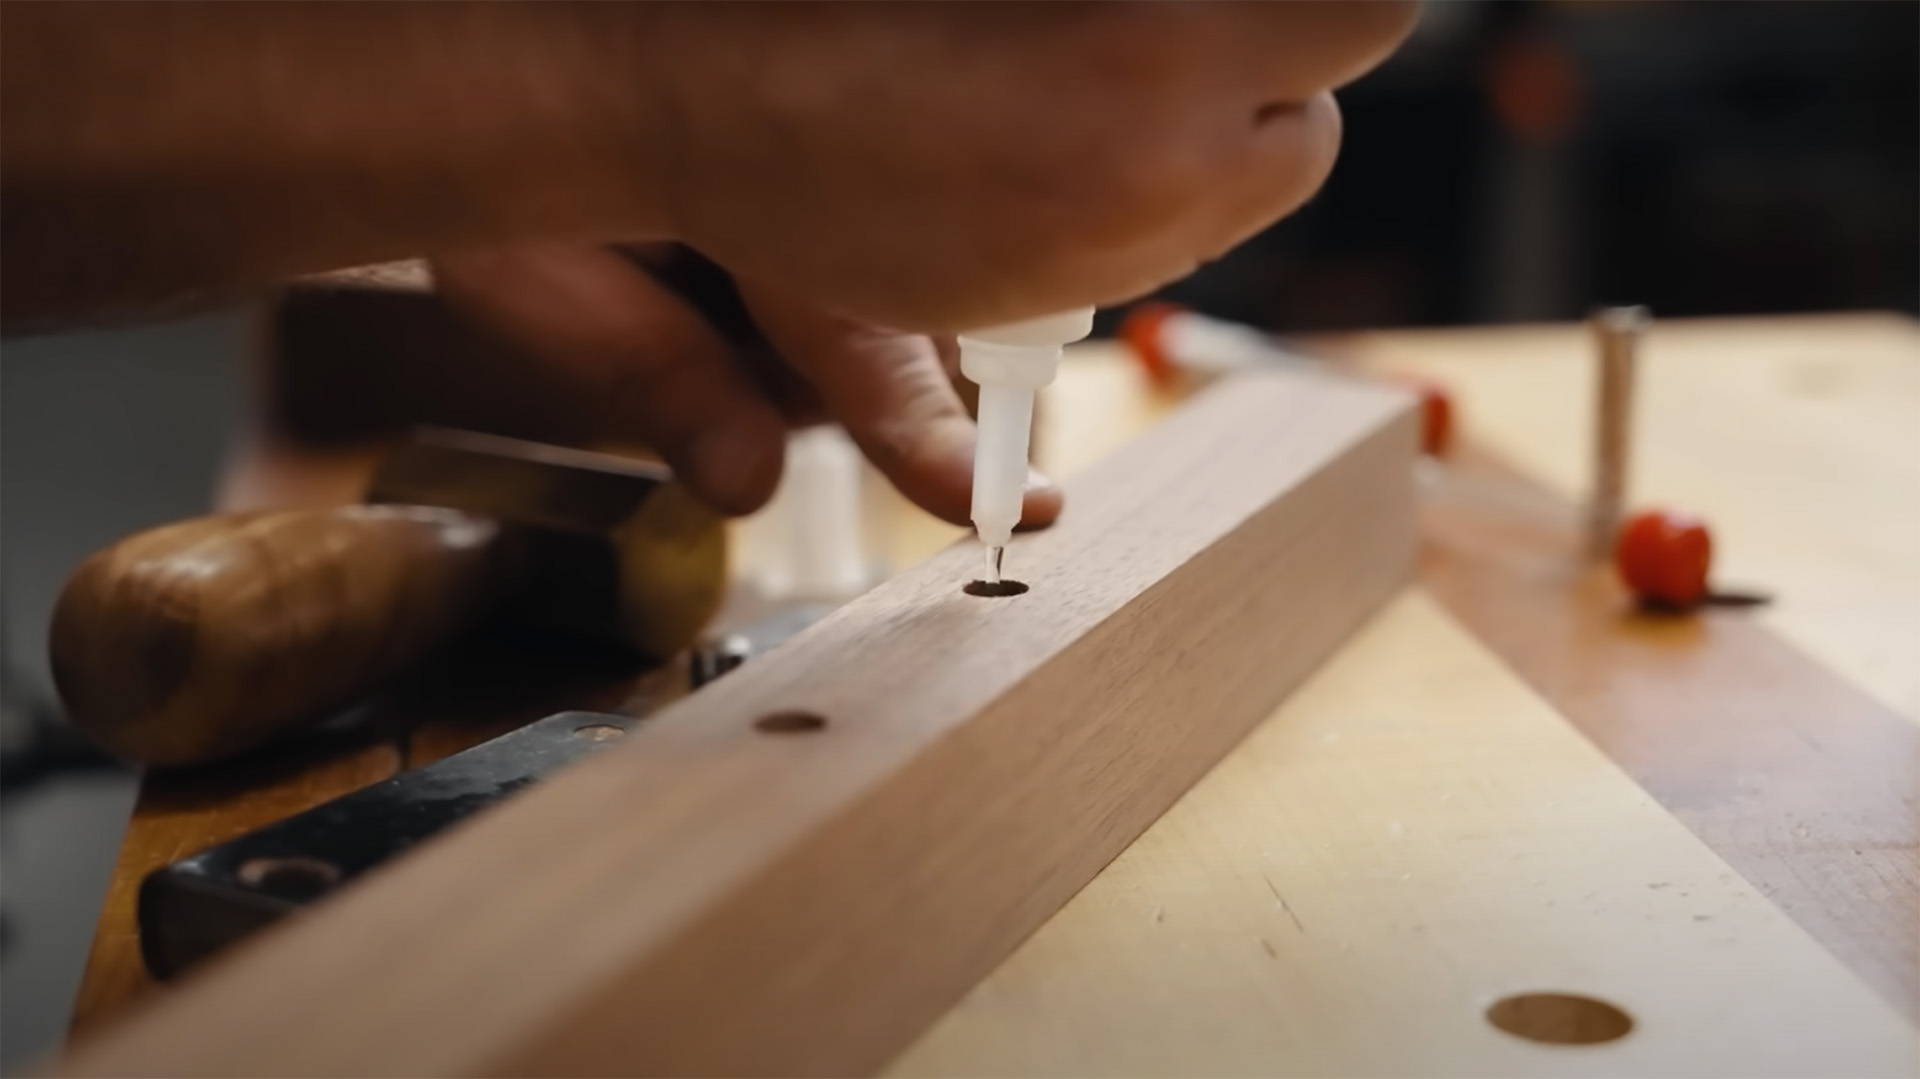 installing magnets in wood